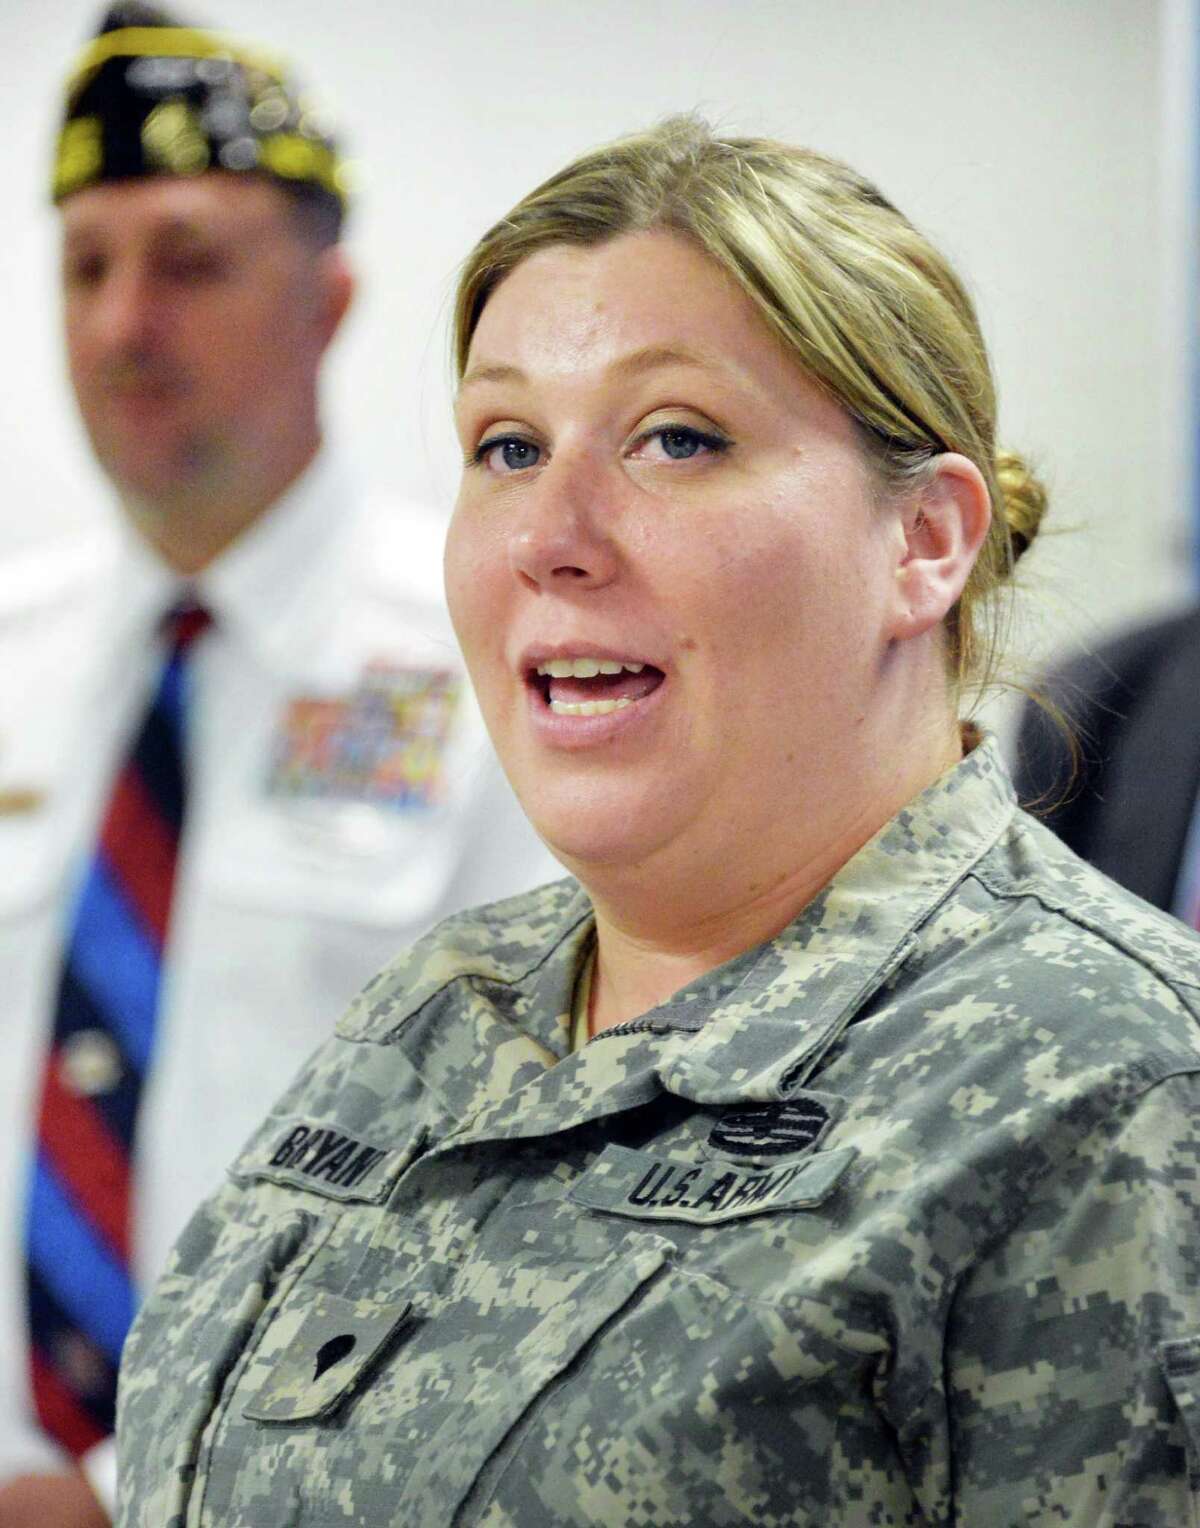 US Army MP Jennifer Nunnery of Batavia speaks during a news conference to urge legislators to pass a bill that helps veterans with mental health ailments in the criminal justice system Tuesday June 10, 2014, in Albany, NY. (John Carl D'Annibale / Times Union)